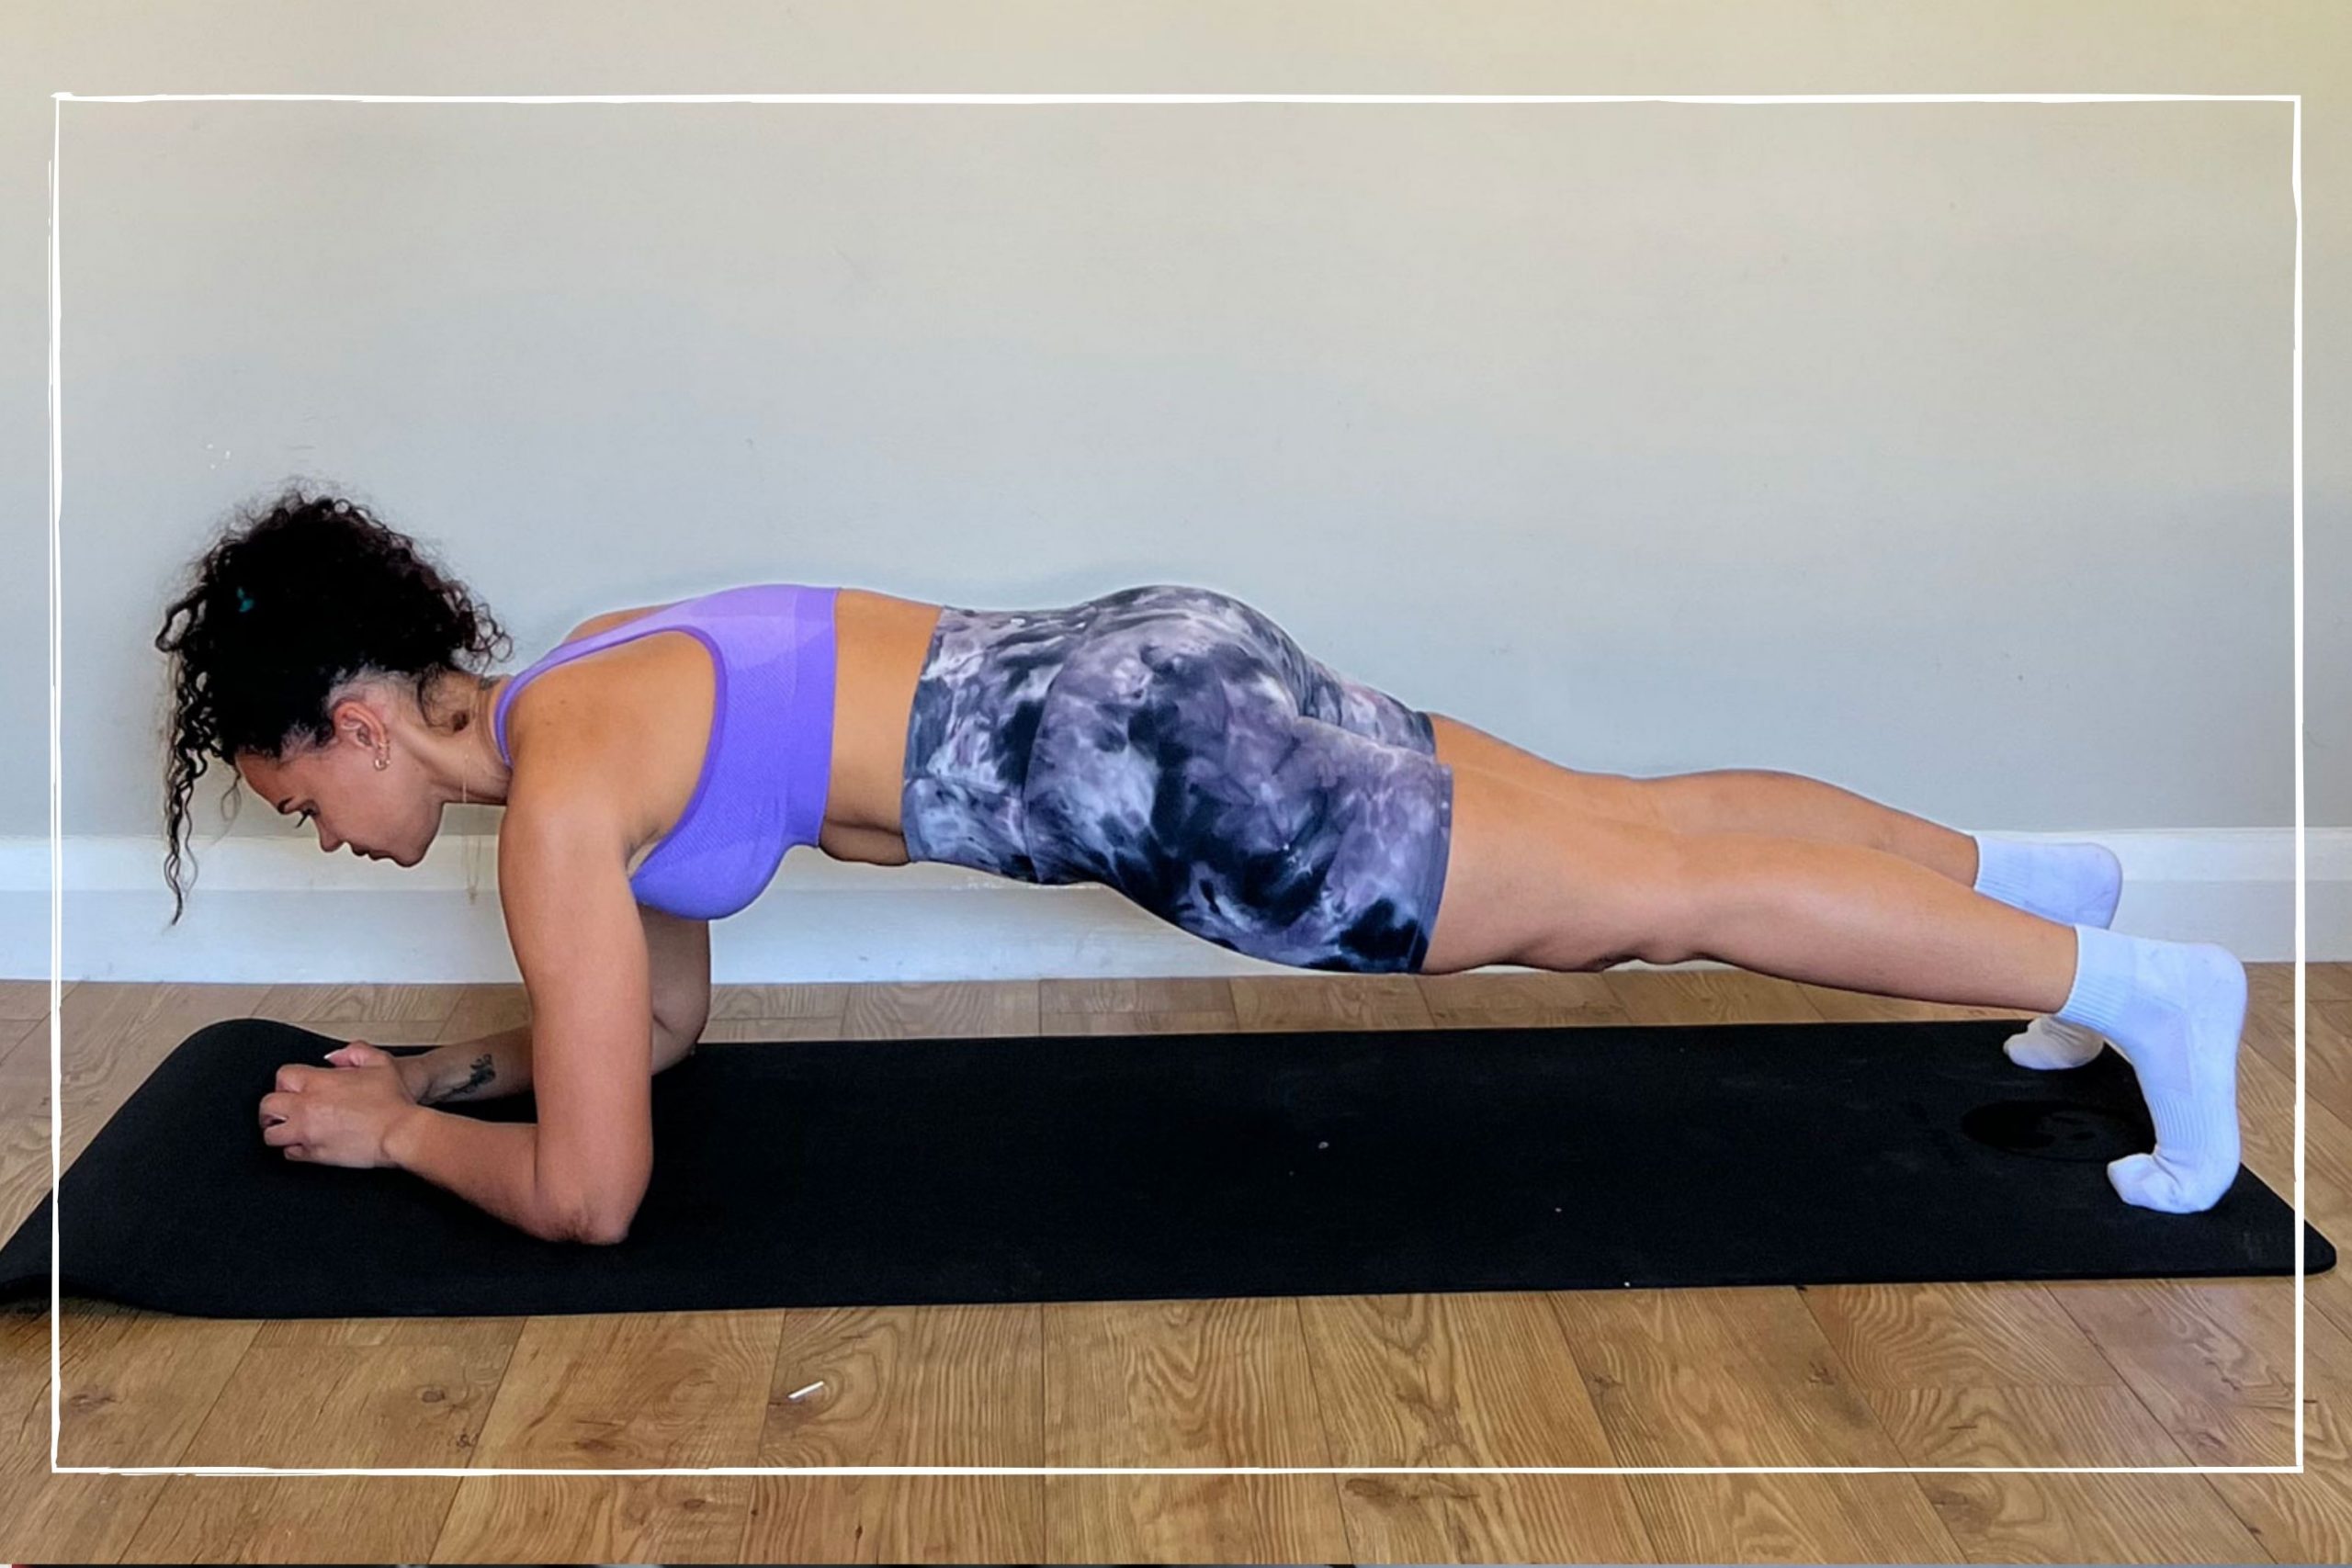 Versterker uitzondering Jachtluipaard The 30 day plank challenge: How to tone up without any gym equipment |  GoodTo